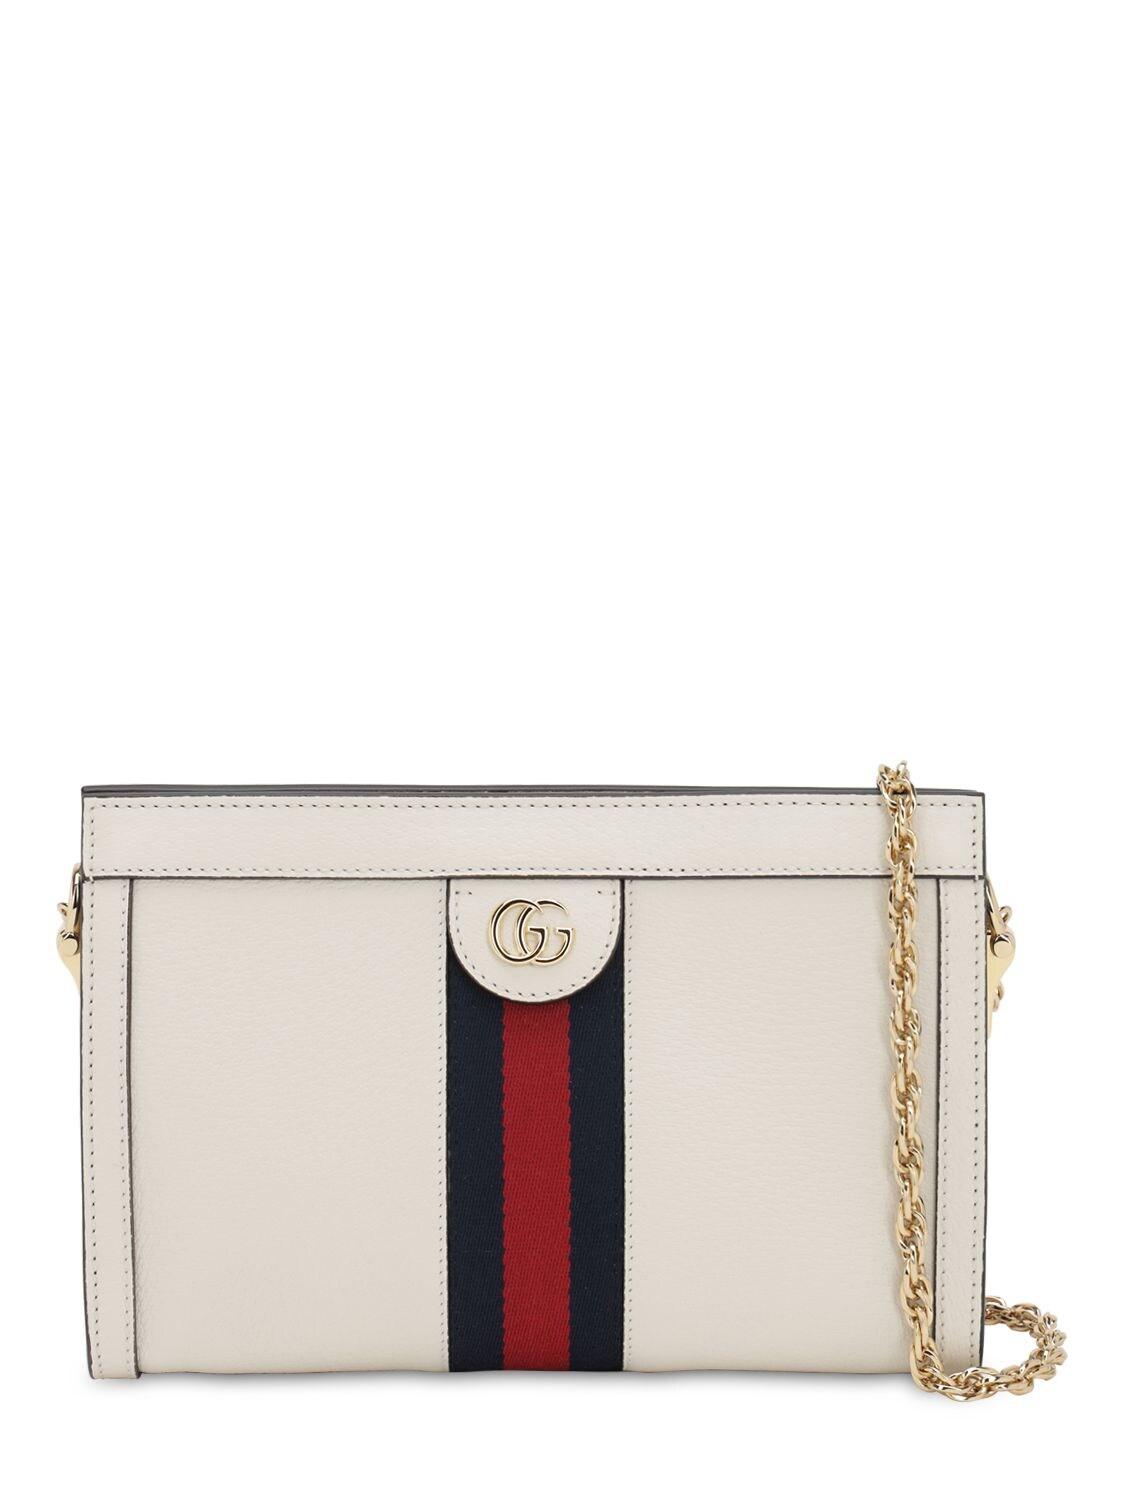 Gucci Ophidia Medium Leather Shoulder Bag in White | Lyst